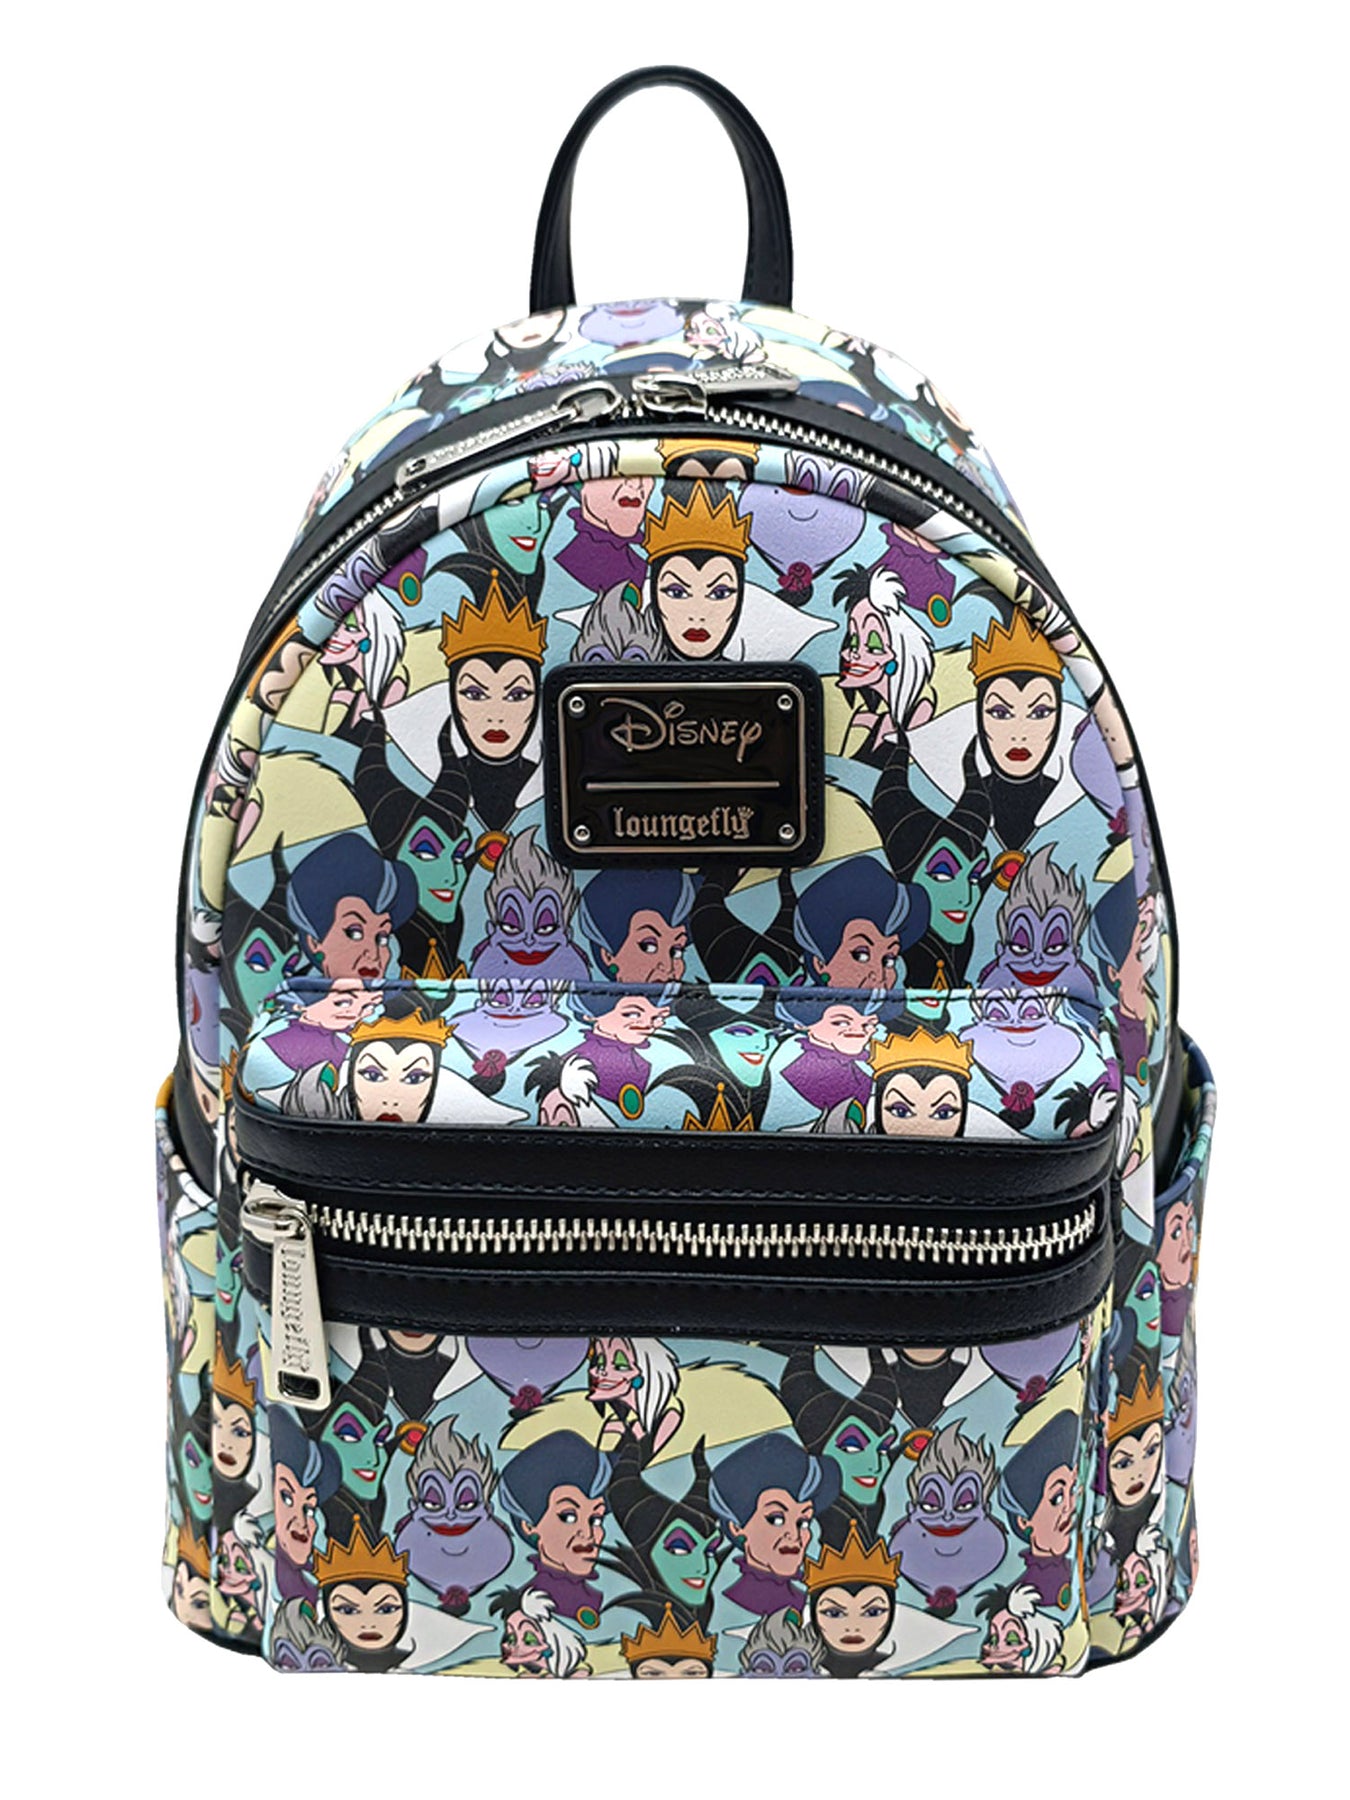 Buckle Up for a Huge Collection of Adorable New Loungefly Disney Bags